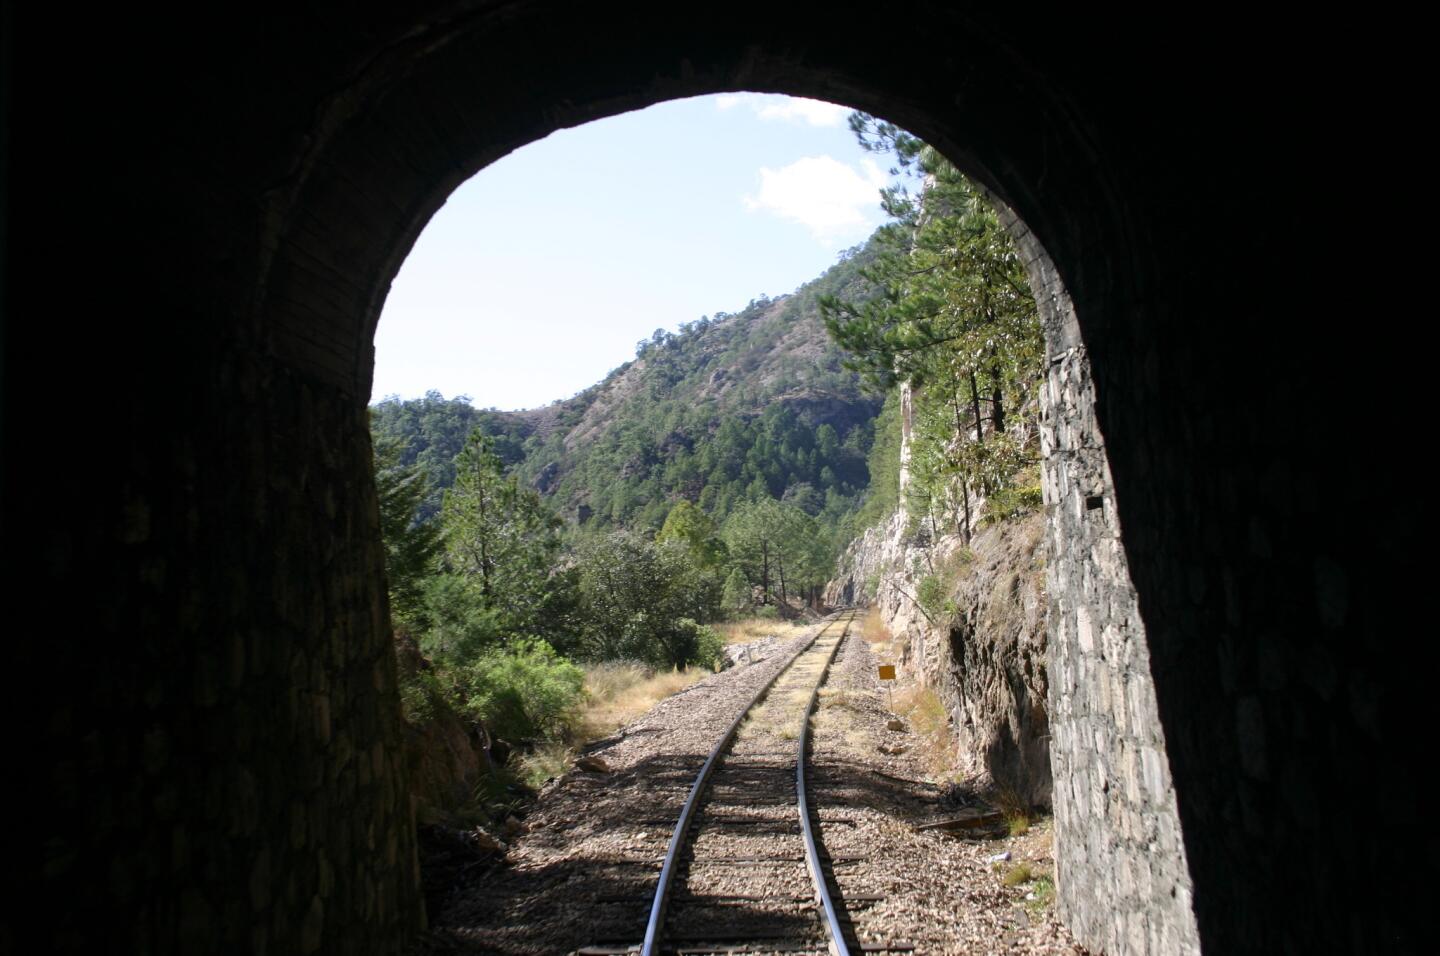 This train travels from Sinaloa to Chihuahua, Mexico on the Copper Canyon Railway. For 13 hours, travelers will see beautiful sites from waterfalls, desert plains and the Sierra Tarahumara.